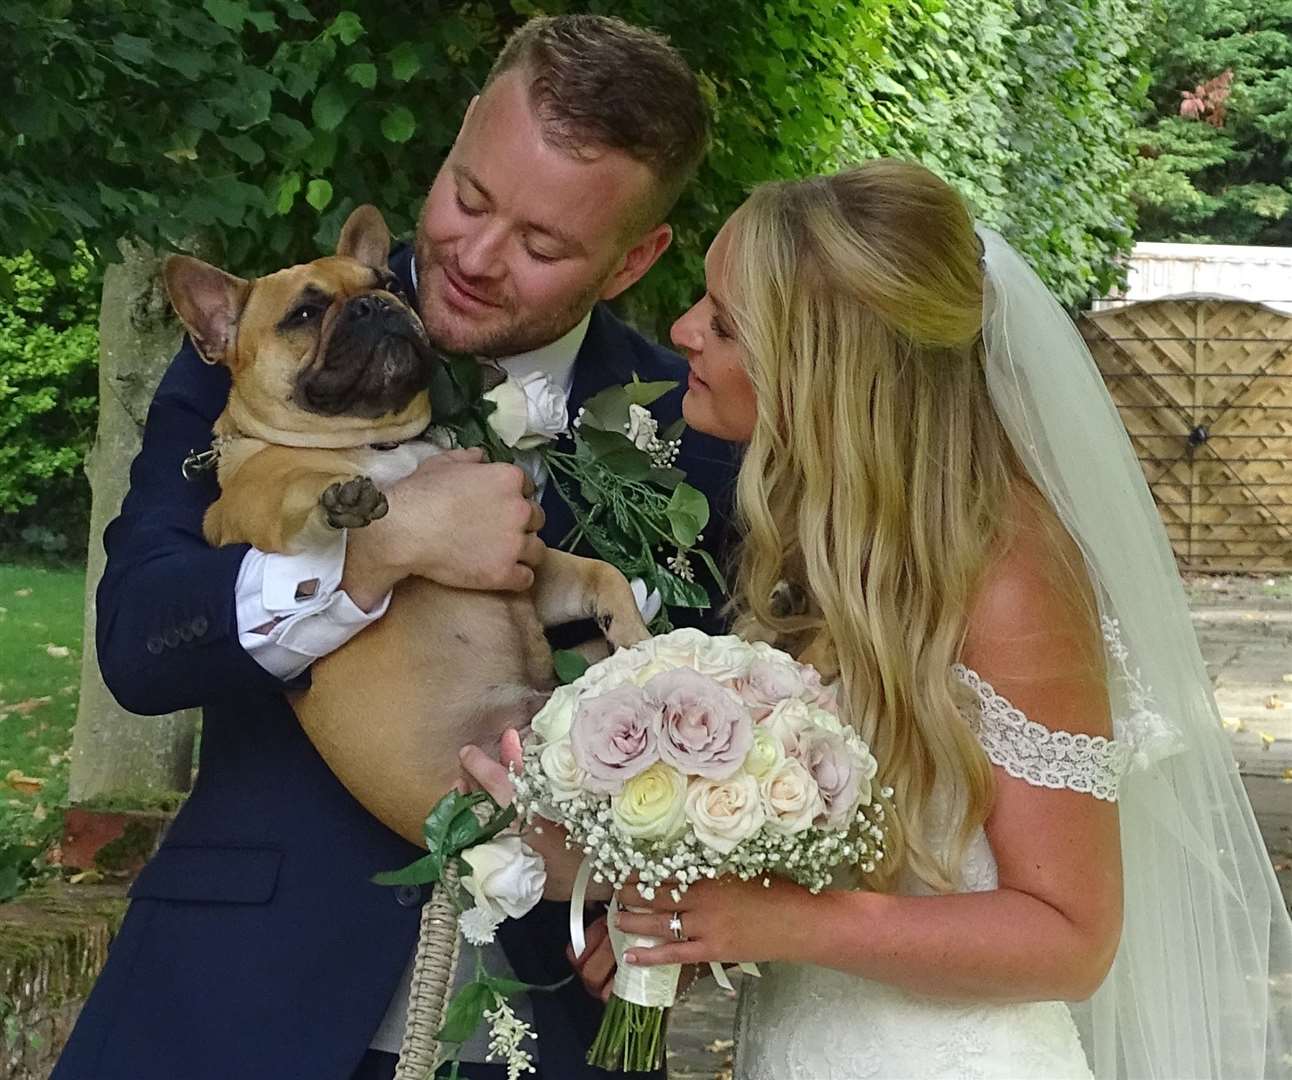 This couple shared their big day with their dog Picture: Furrytail Weddings